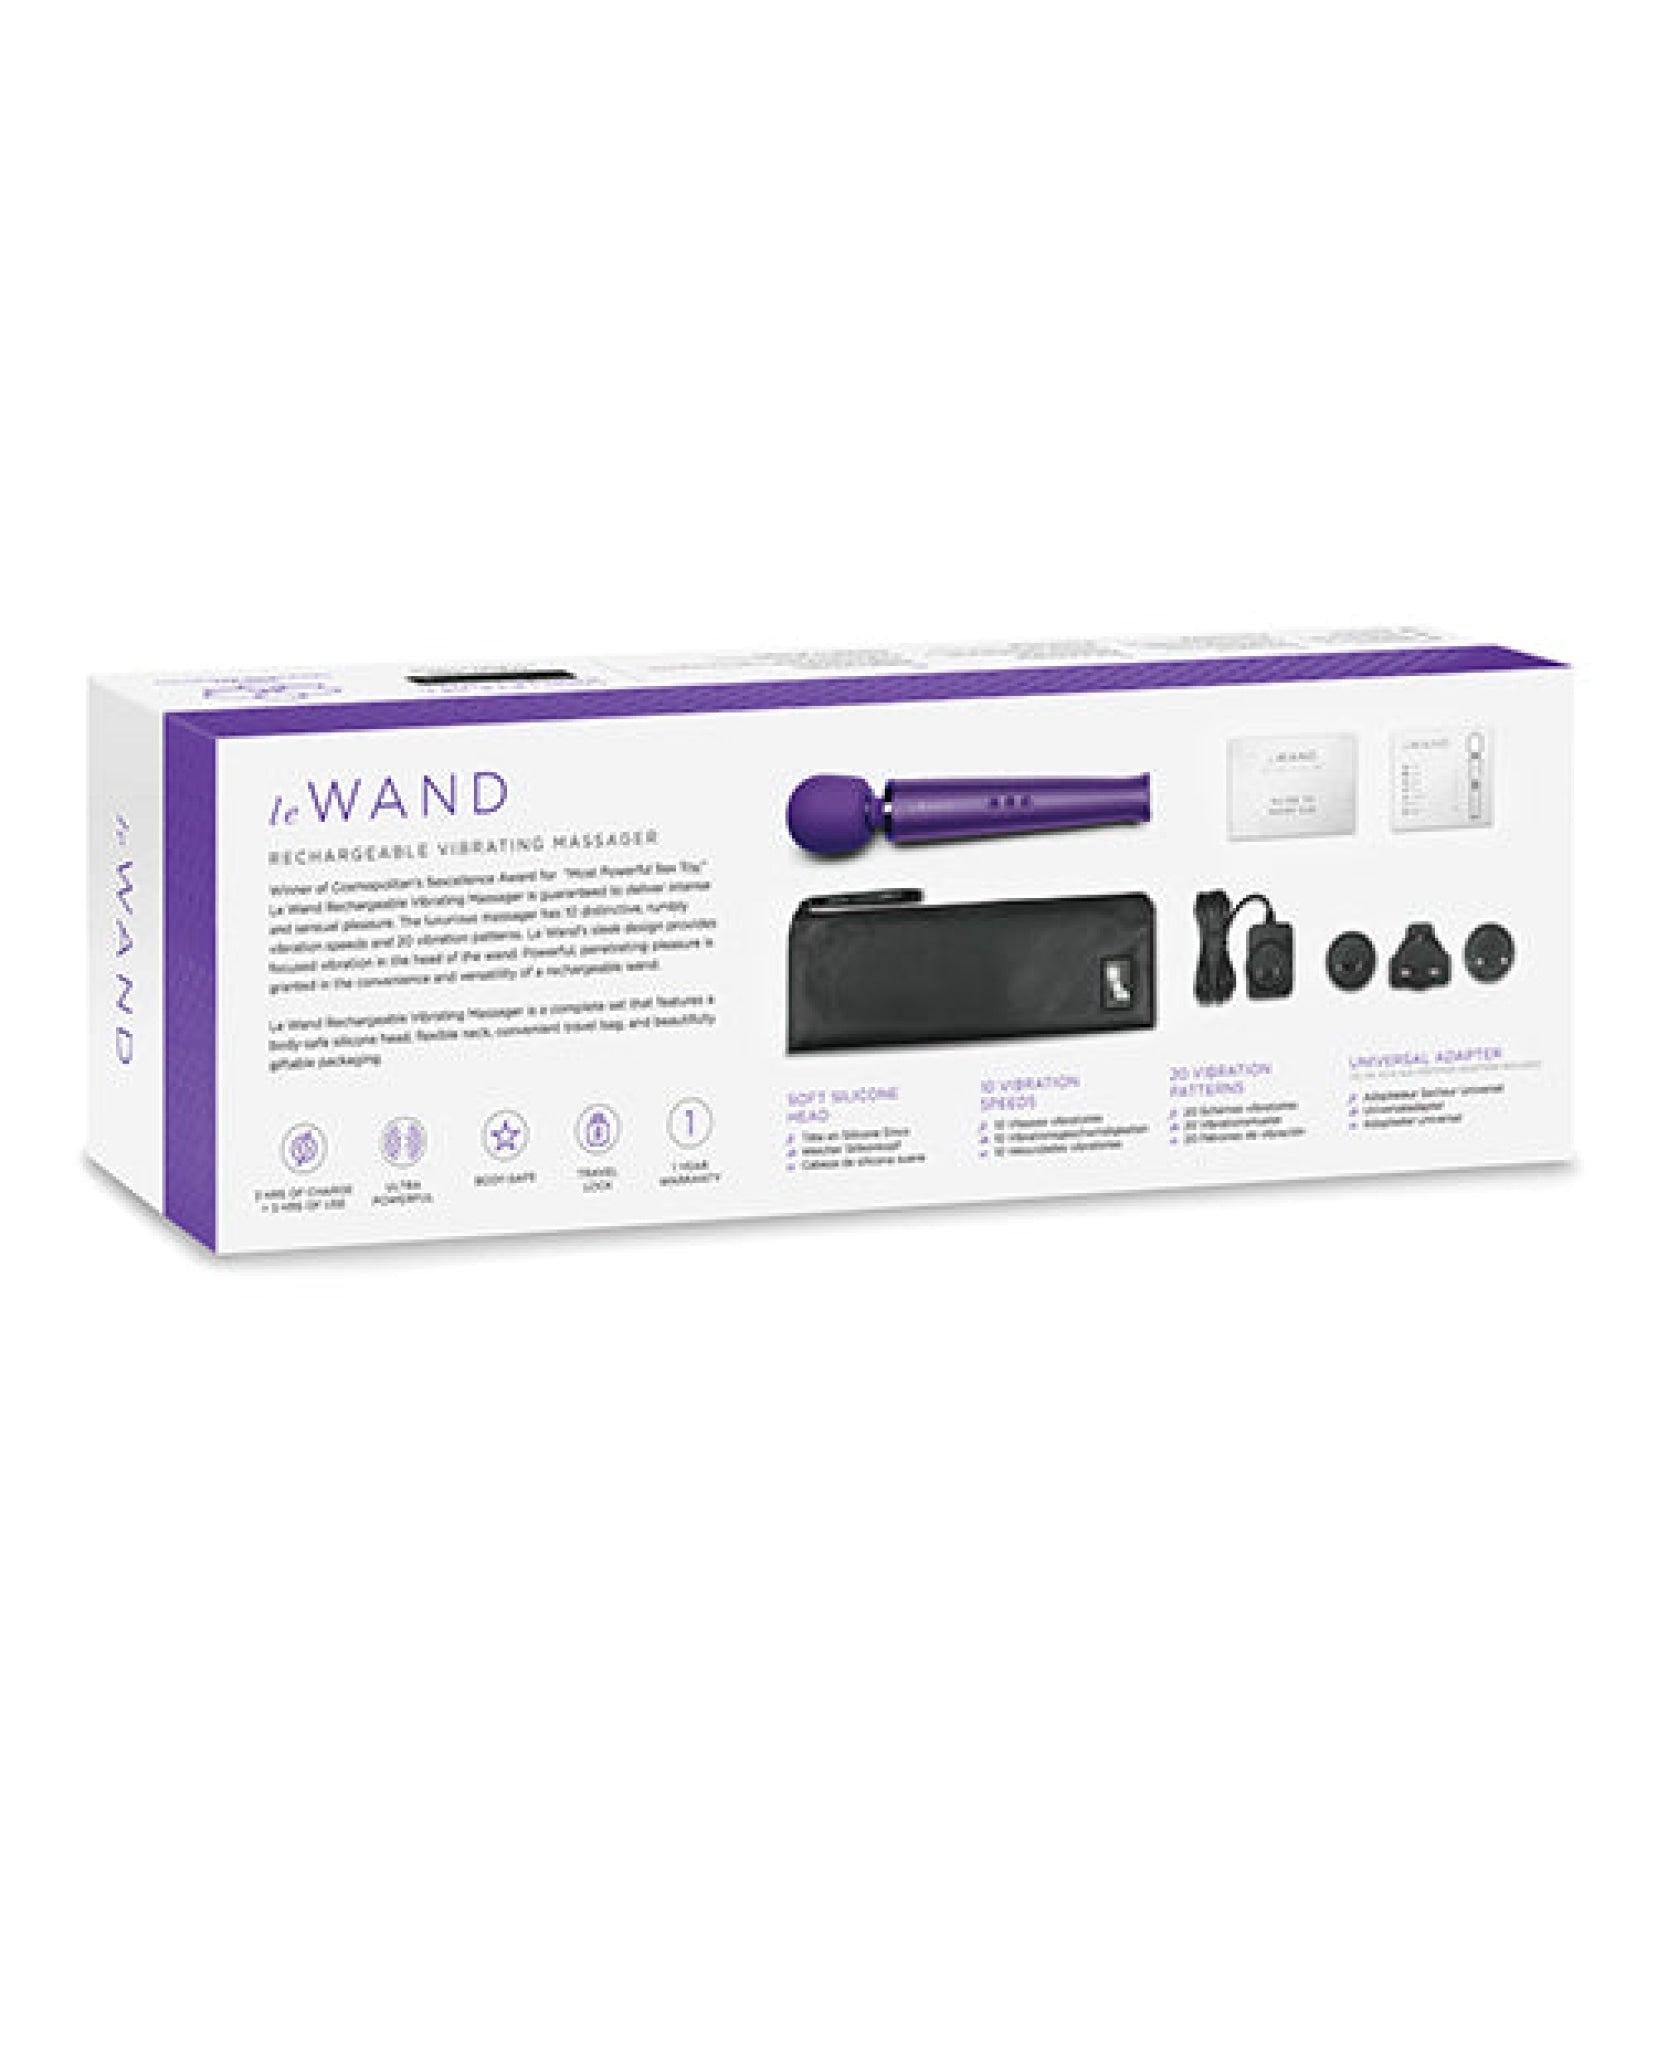 Le Wand Rechargeable Massager Le Wand